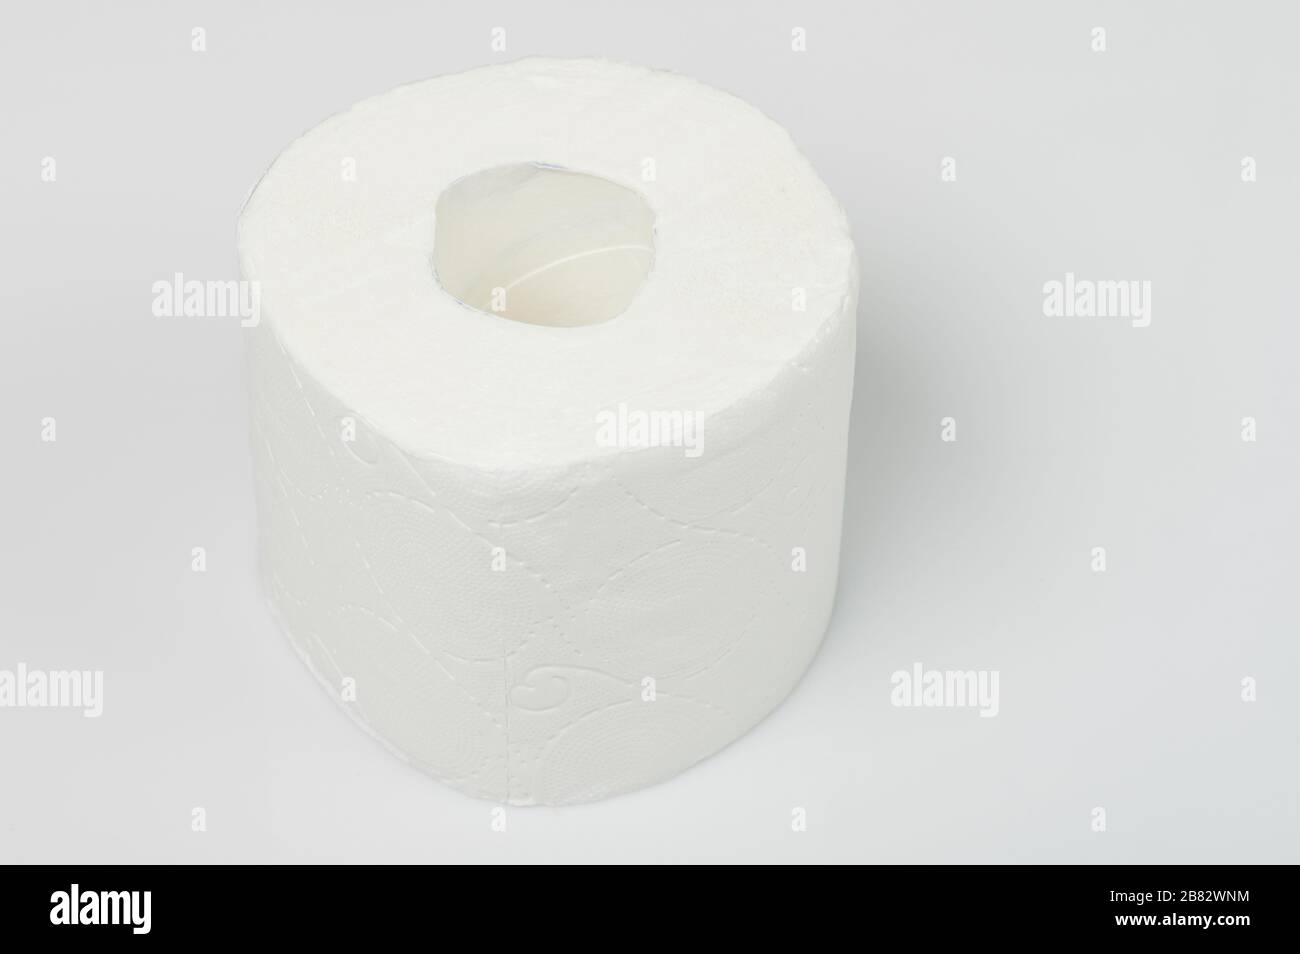 New roll of toilet paper stand on white studio background Stock Photo